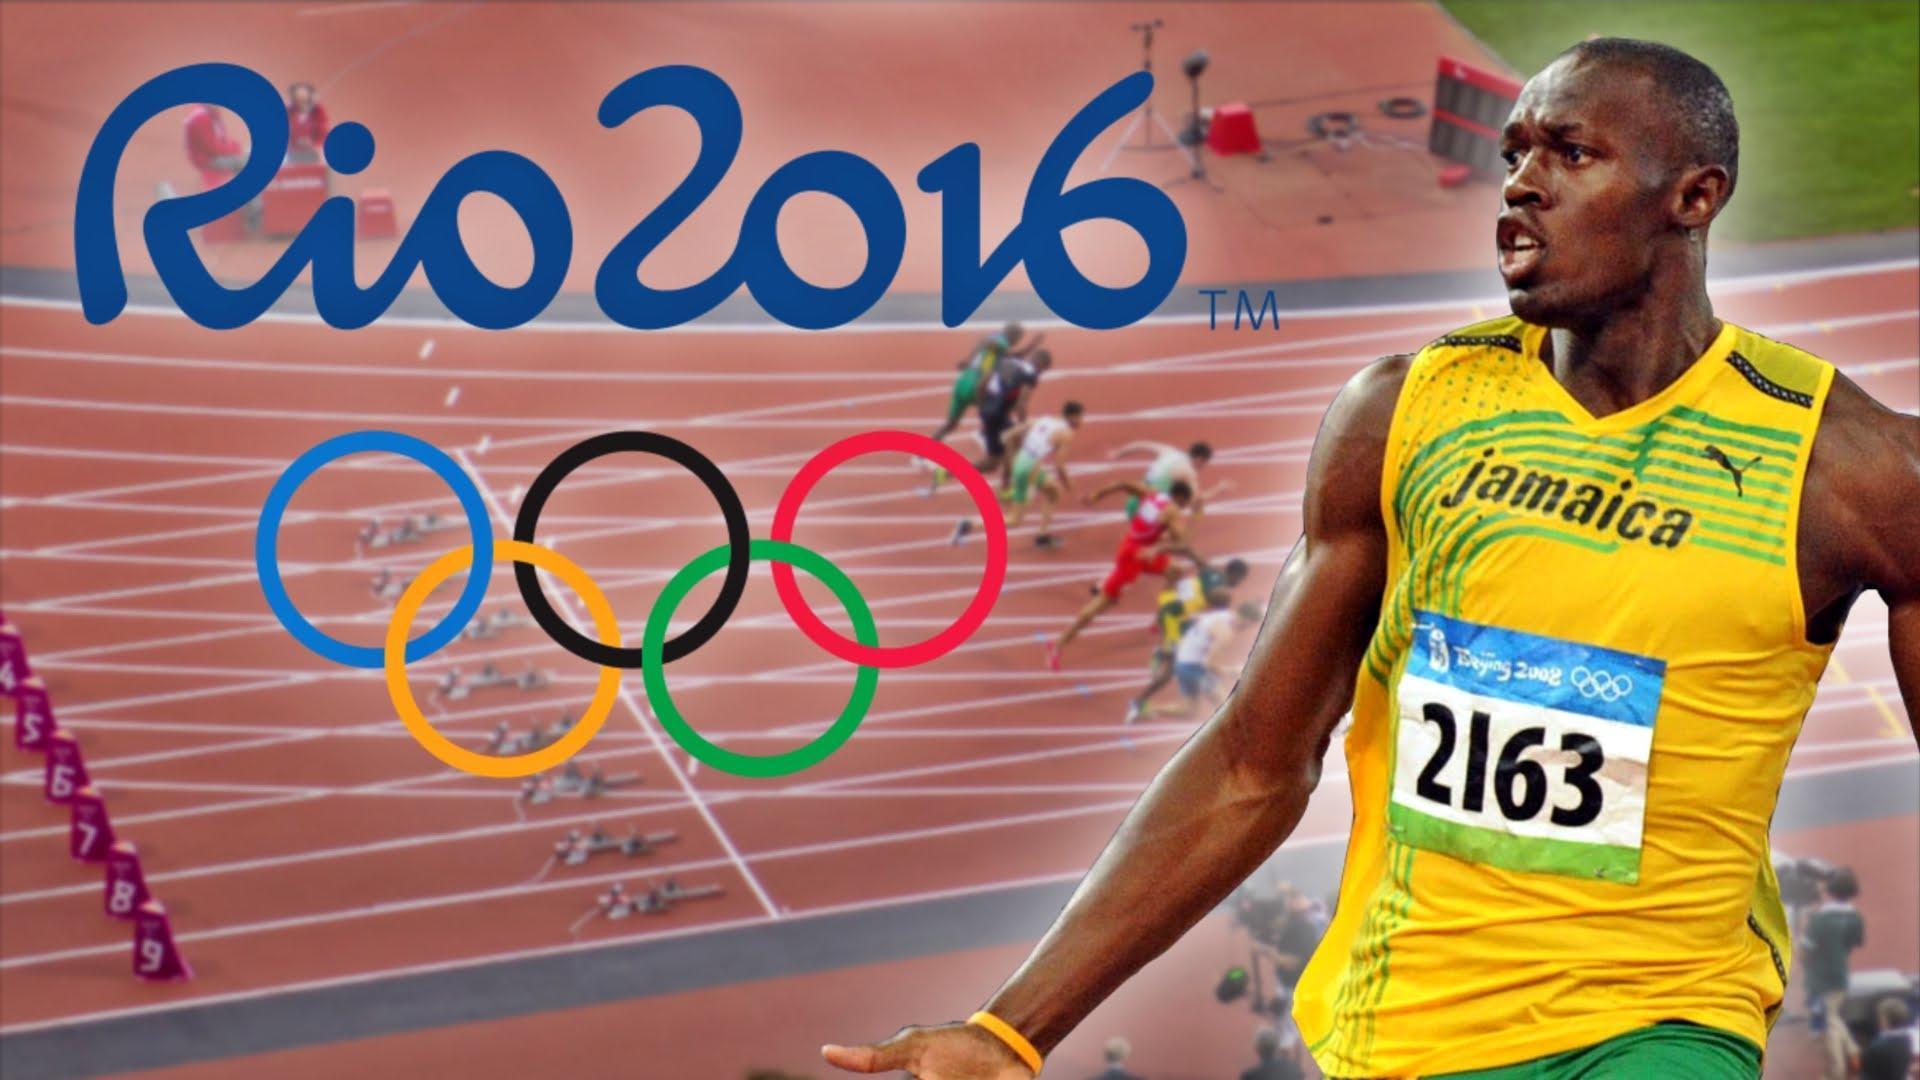 Rio 2016 Olympics. Athletics Preview HD